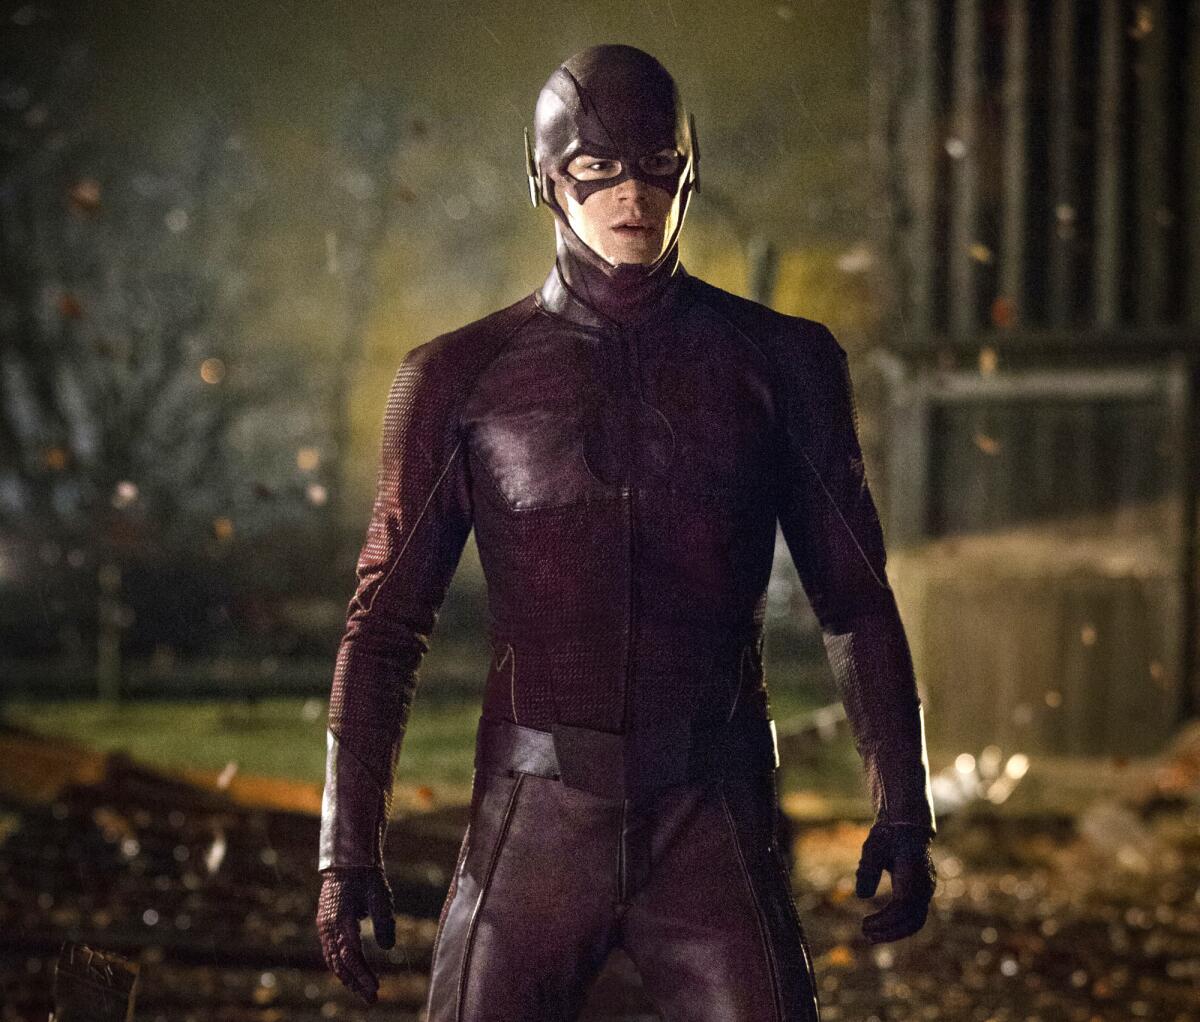 Grant Gustin in a scene from "The Flash," which premiered Tuesday on the CW. Gustin stars as Barry Allen, a young man who gets struck by lightning and becomes the fastest person alive.